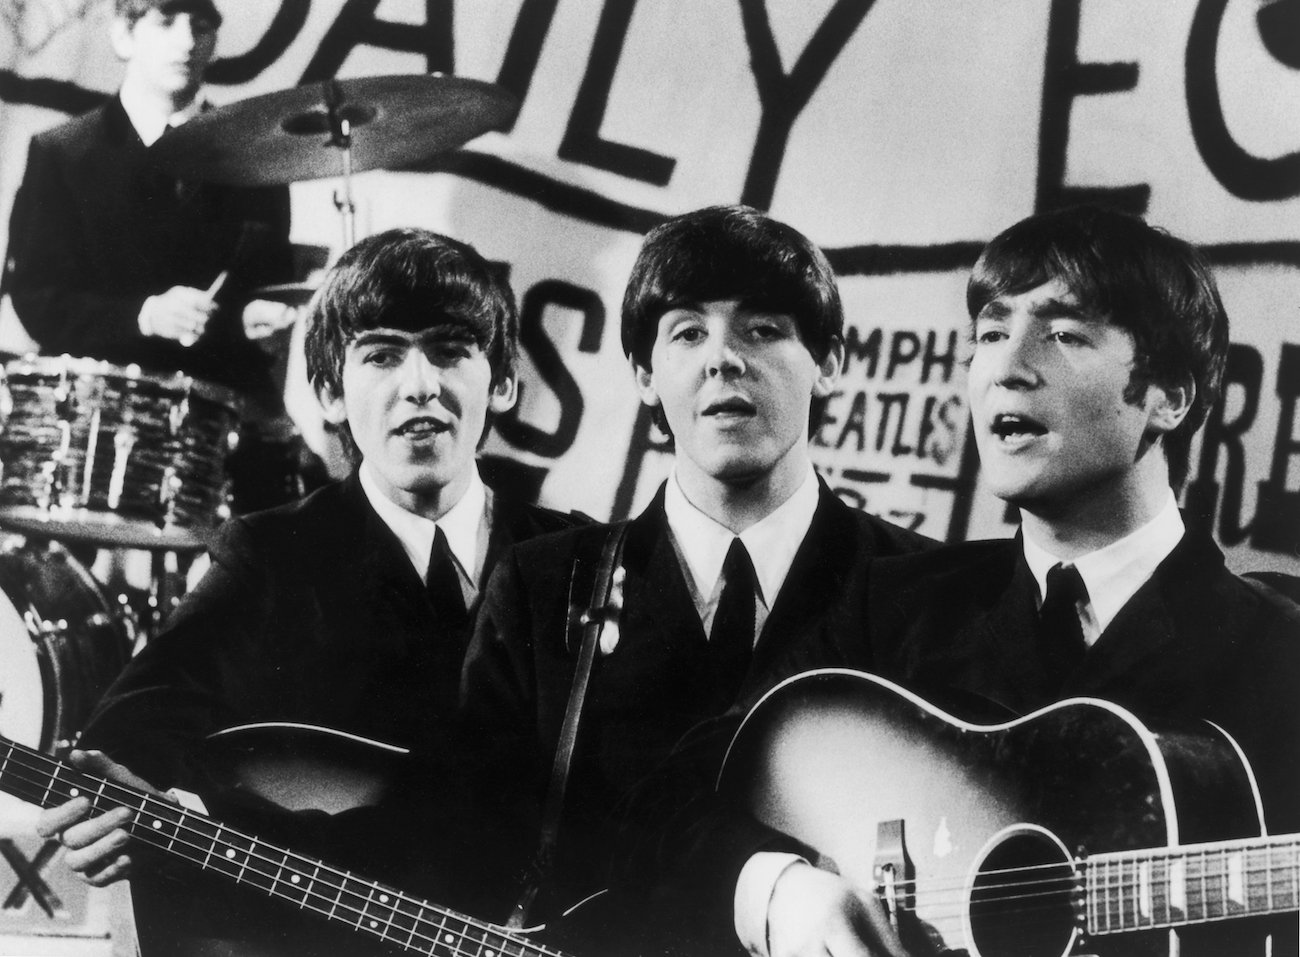 George Harrison Thought The Beatles Would Survive Only a Couple Years,  Here's What He Planned to Do After